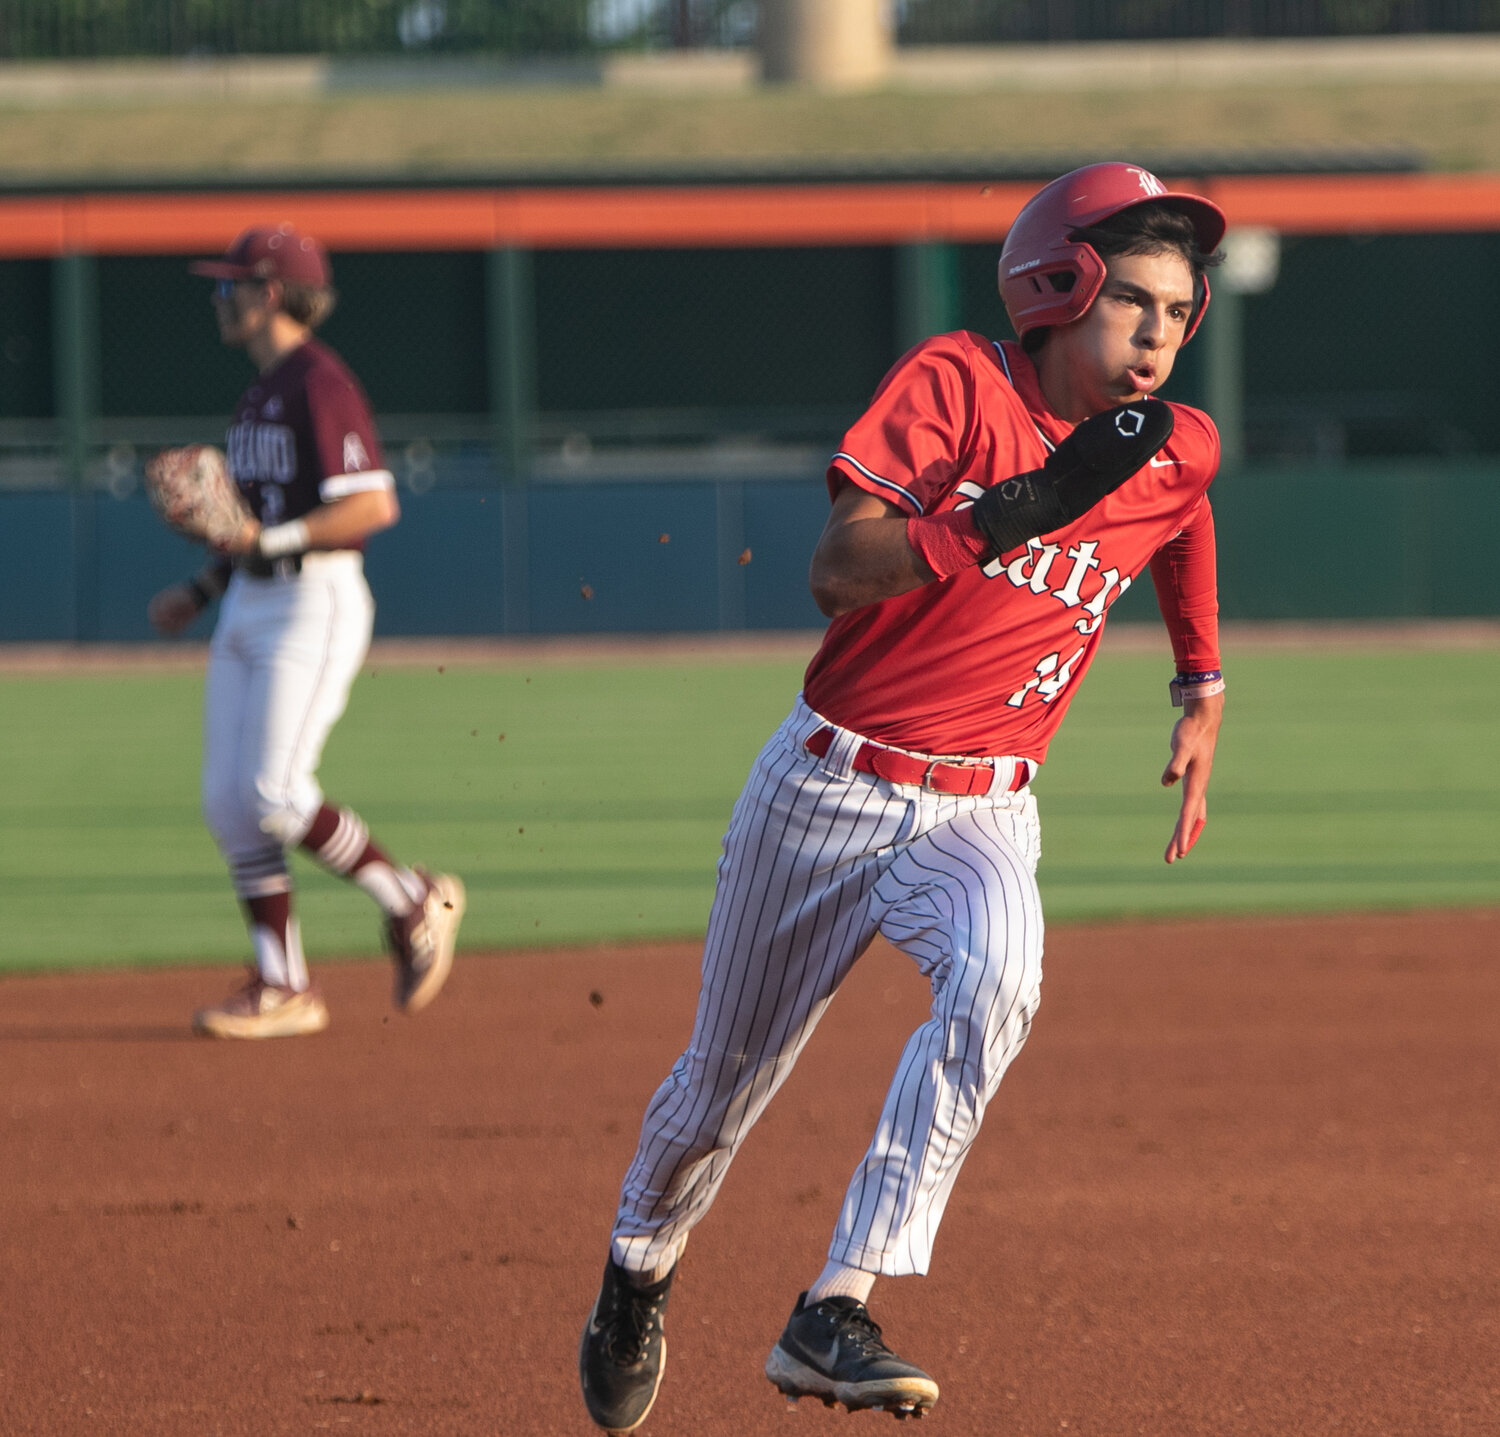 AJ Atkinson rounds third base during Friday's Regional Final between Katy and Pearland at Constellation Field in Sugar Land.